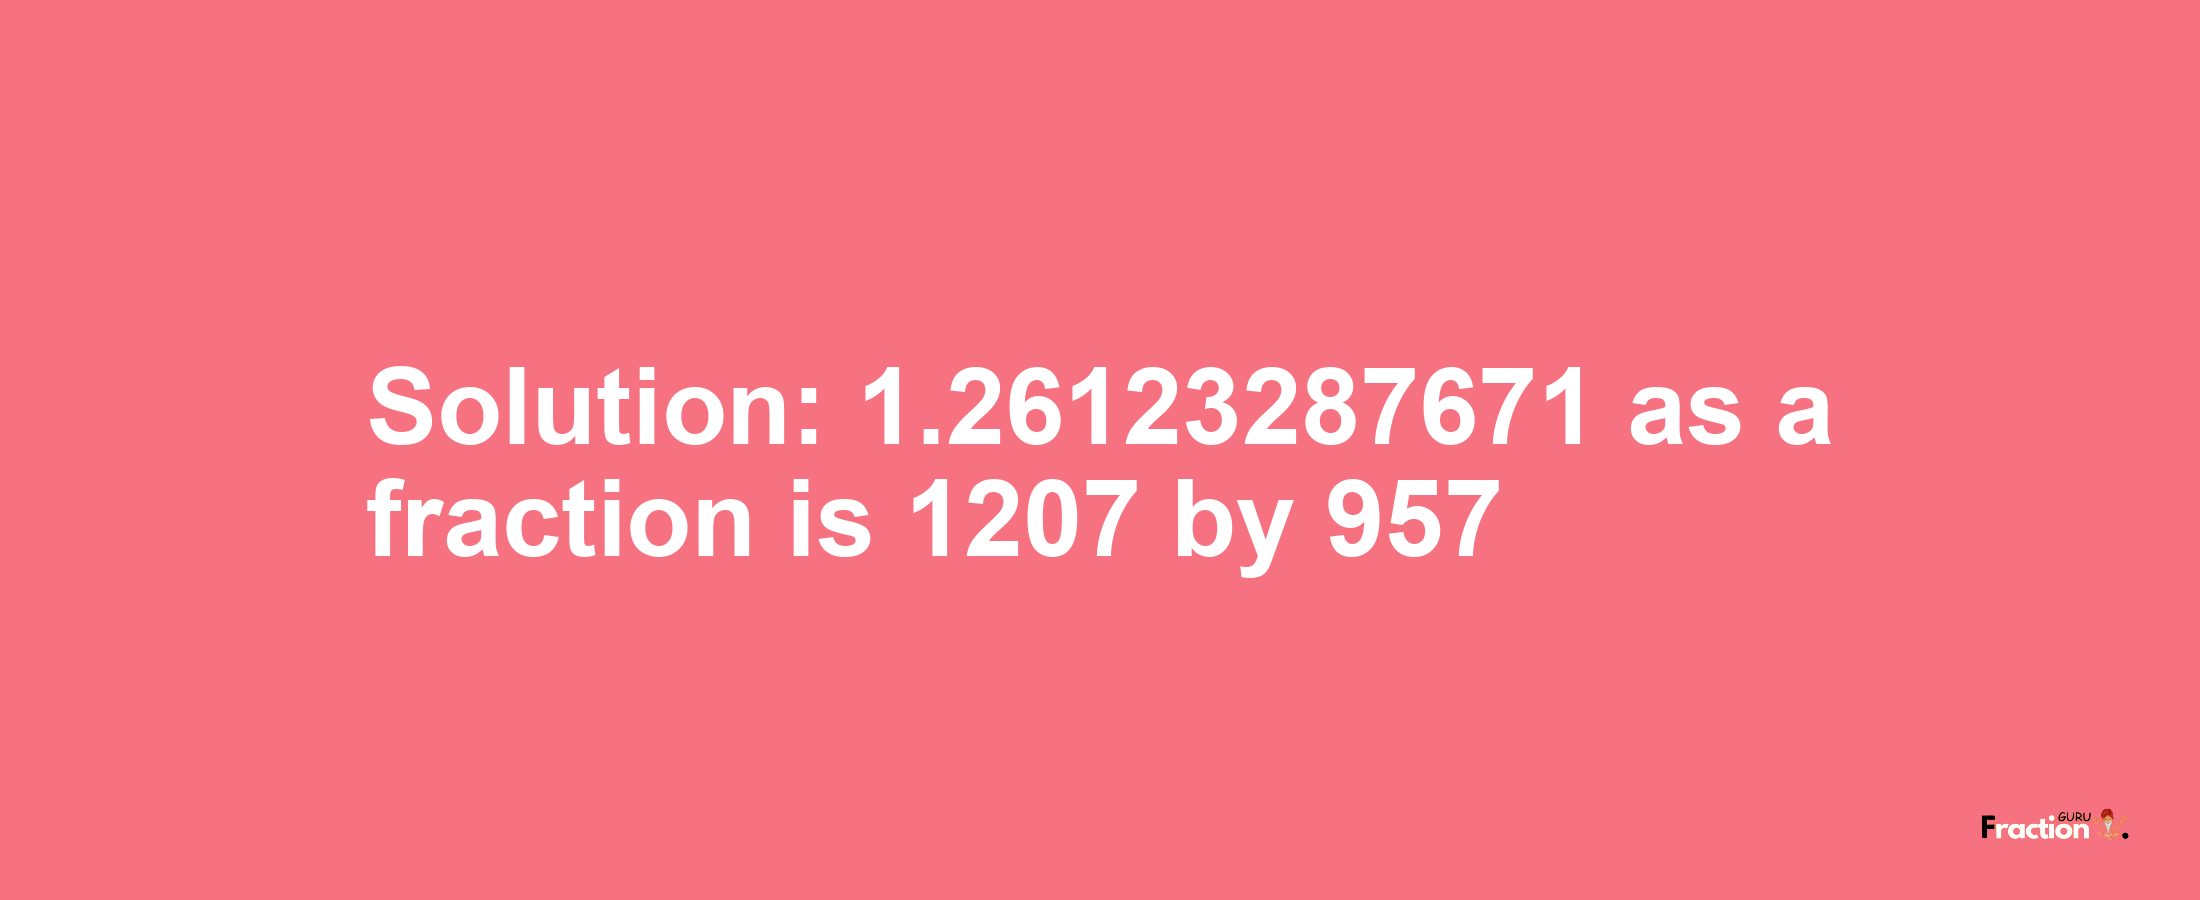 Solution:1.26123287671 as a fraction is 1207/957